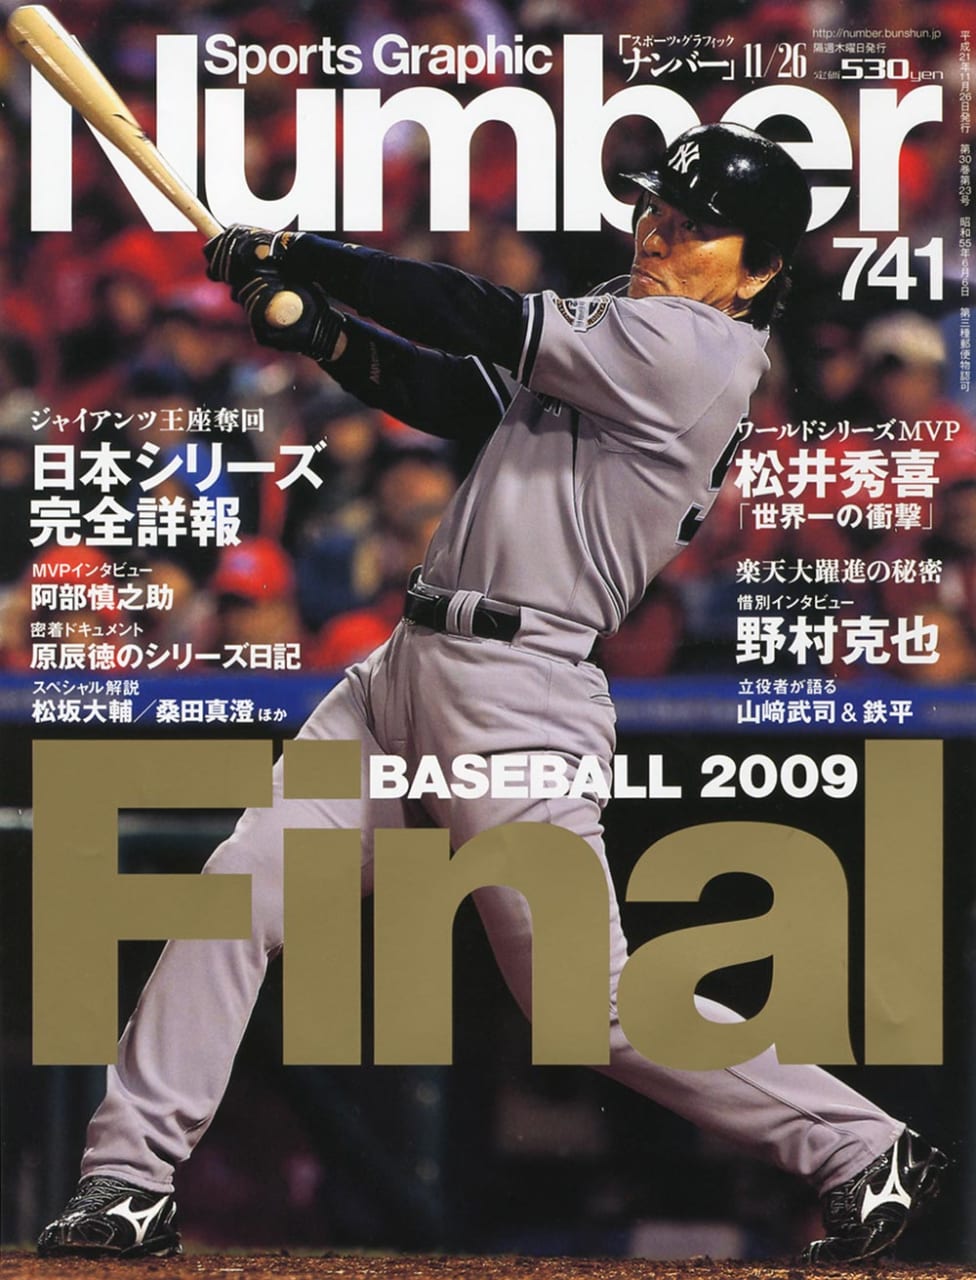 Sports Graphic Number 741号
2009年11月12日発売
表紙撮影：Getty Images